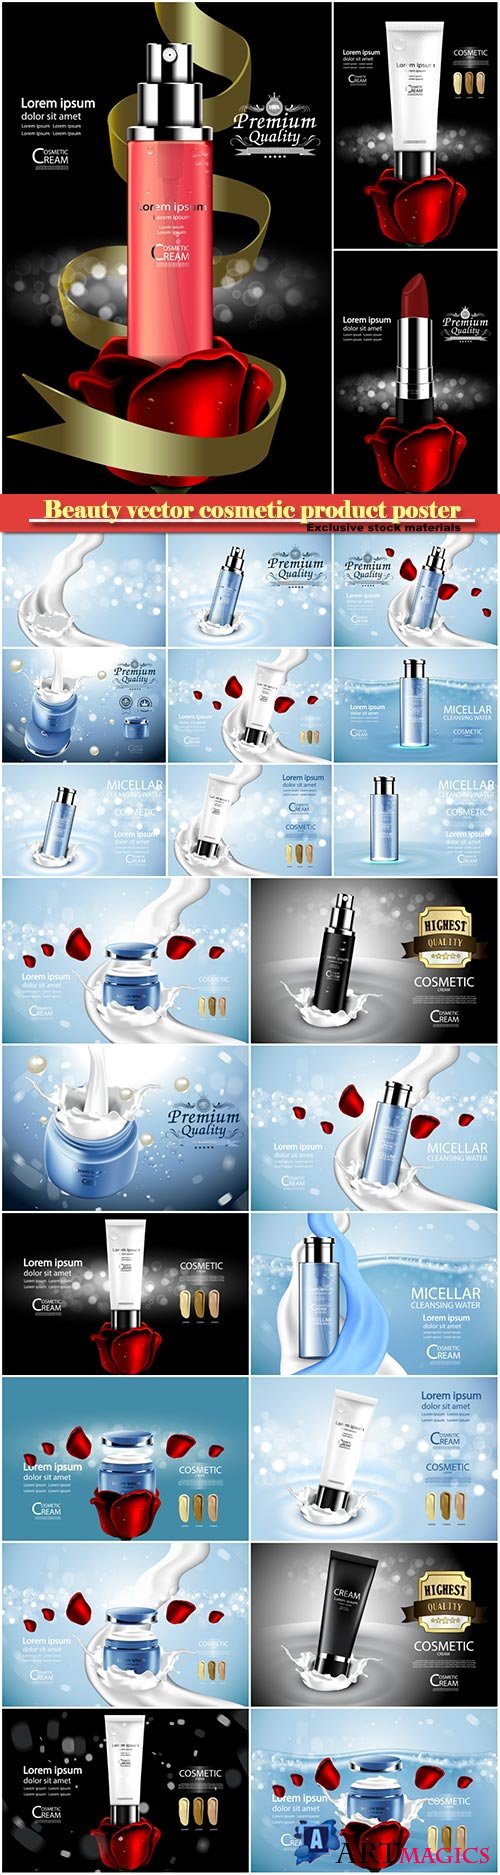 Beauty vector cosmetic product poster # 19